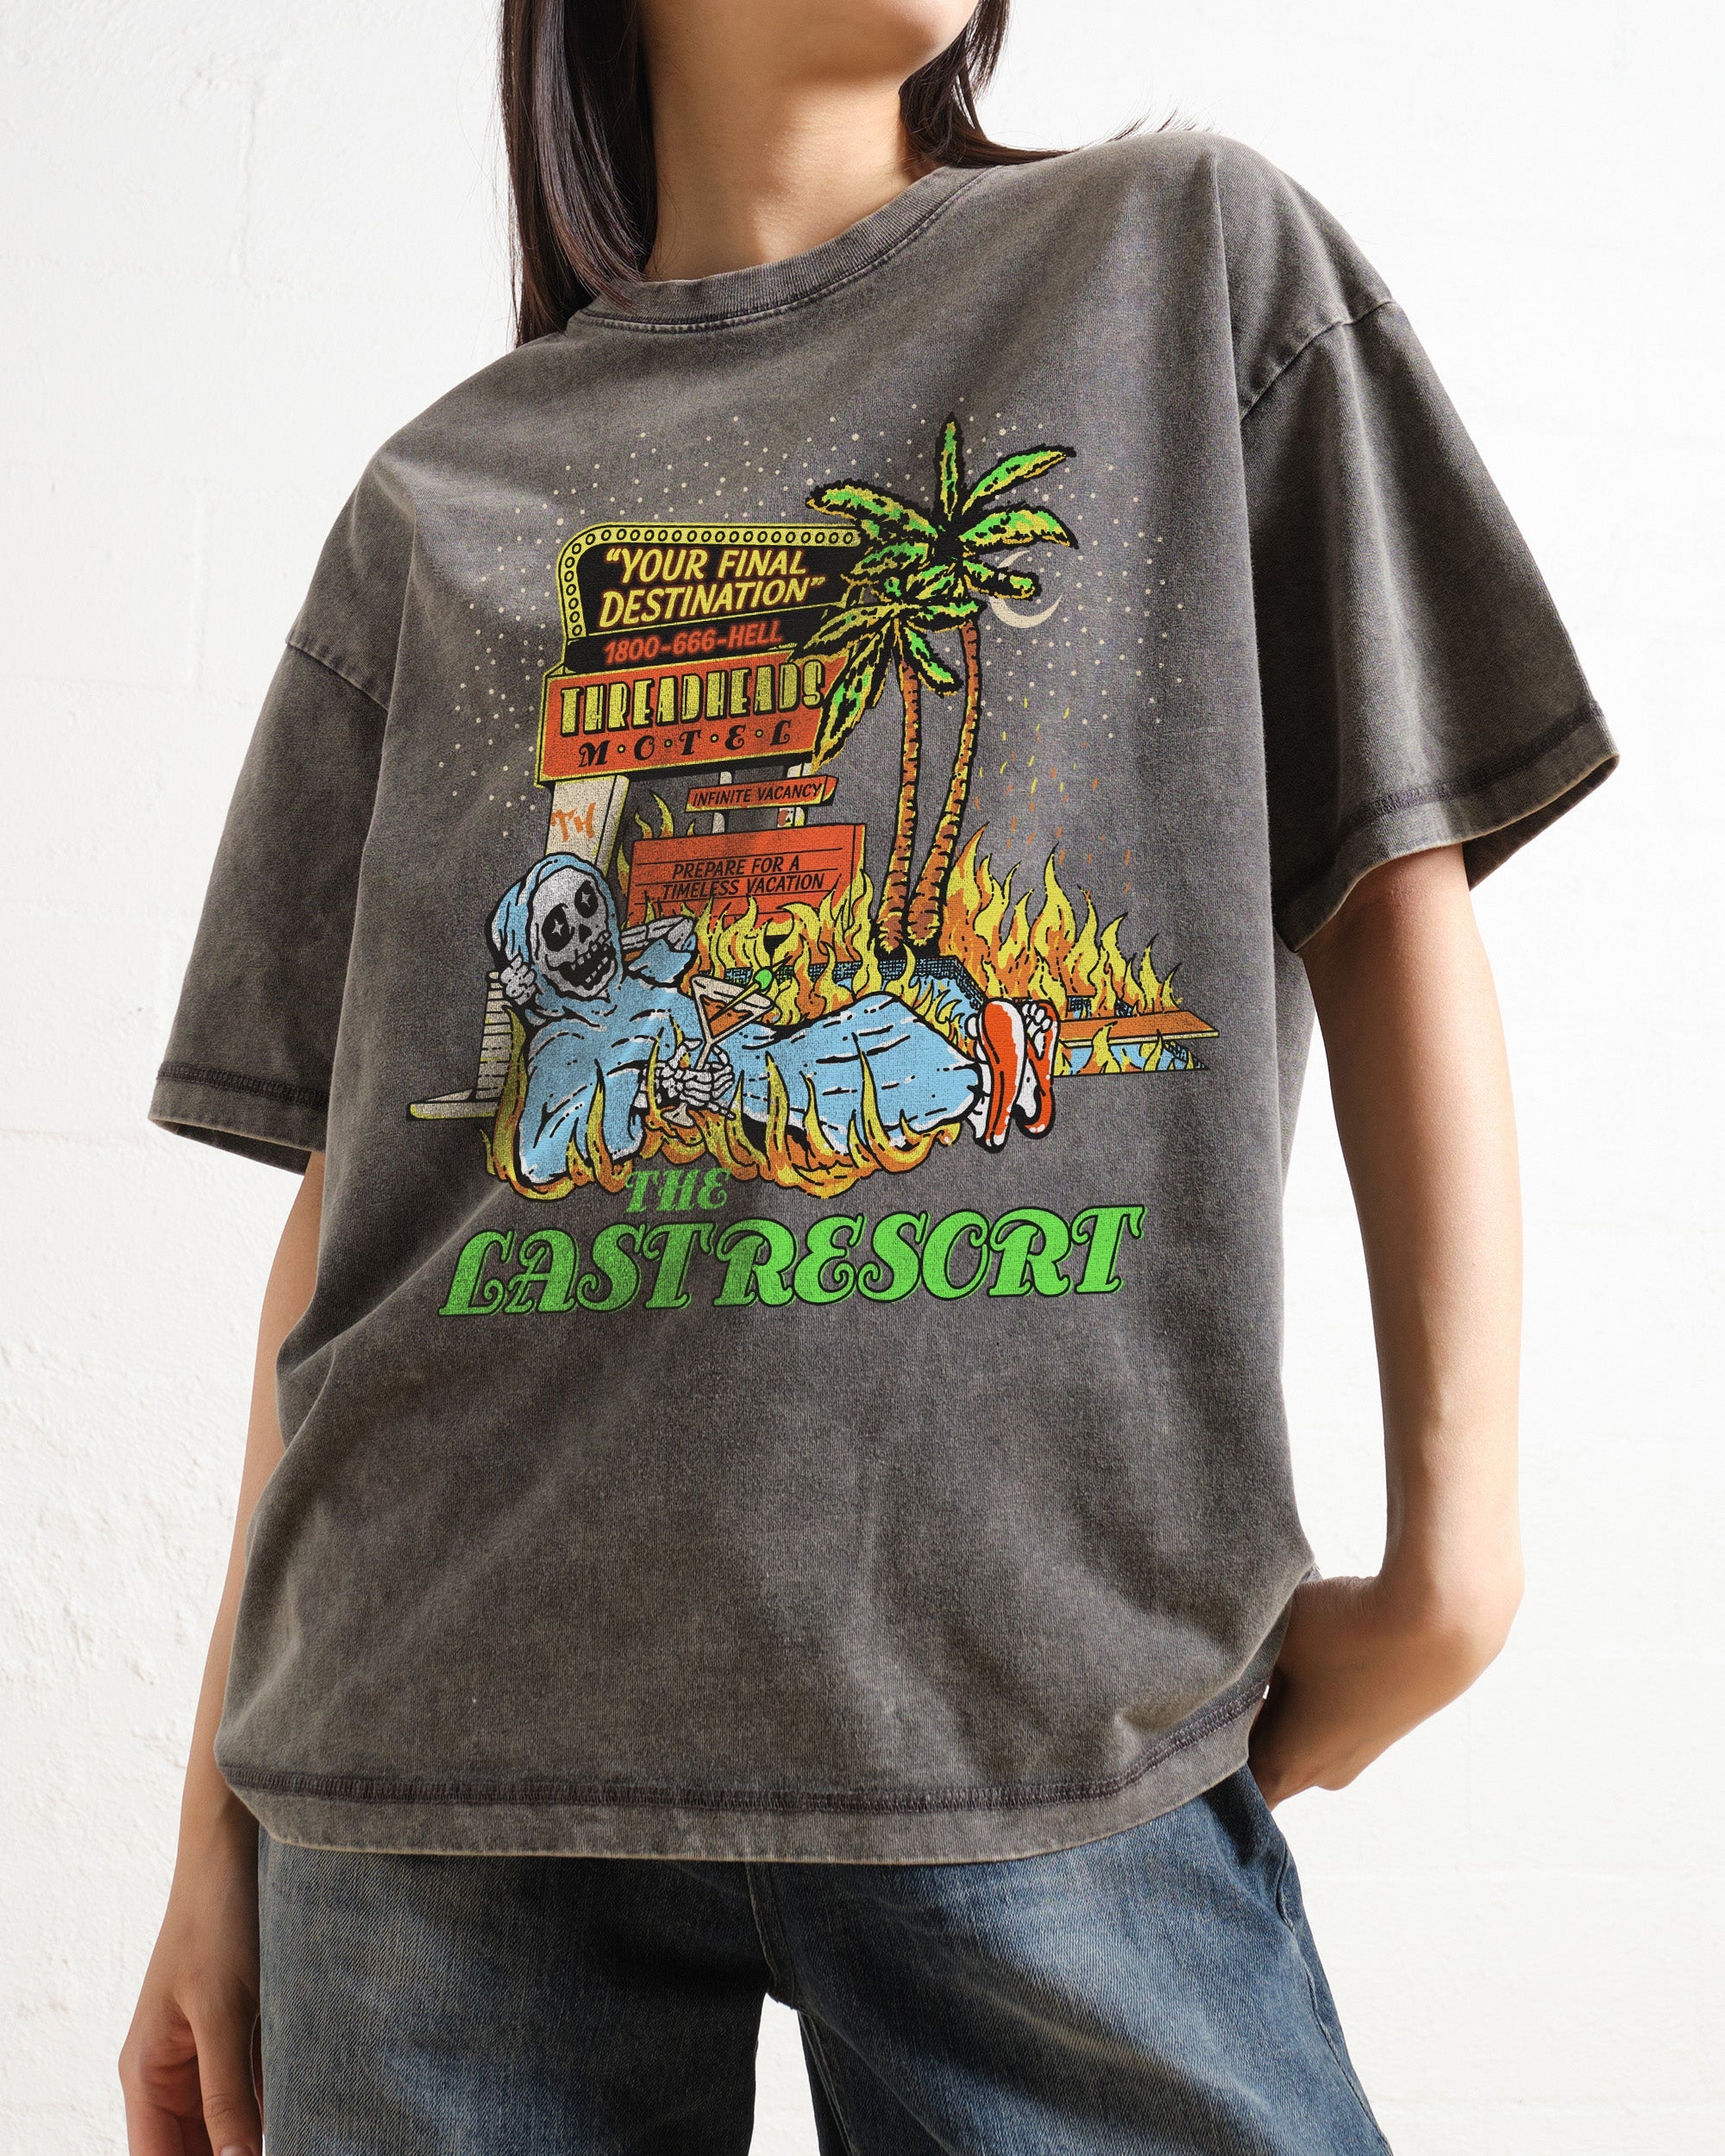 Last Resort Hotel Vacation Packages Wash Tee